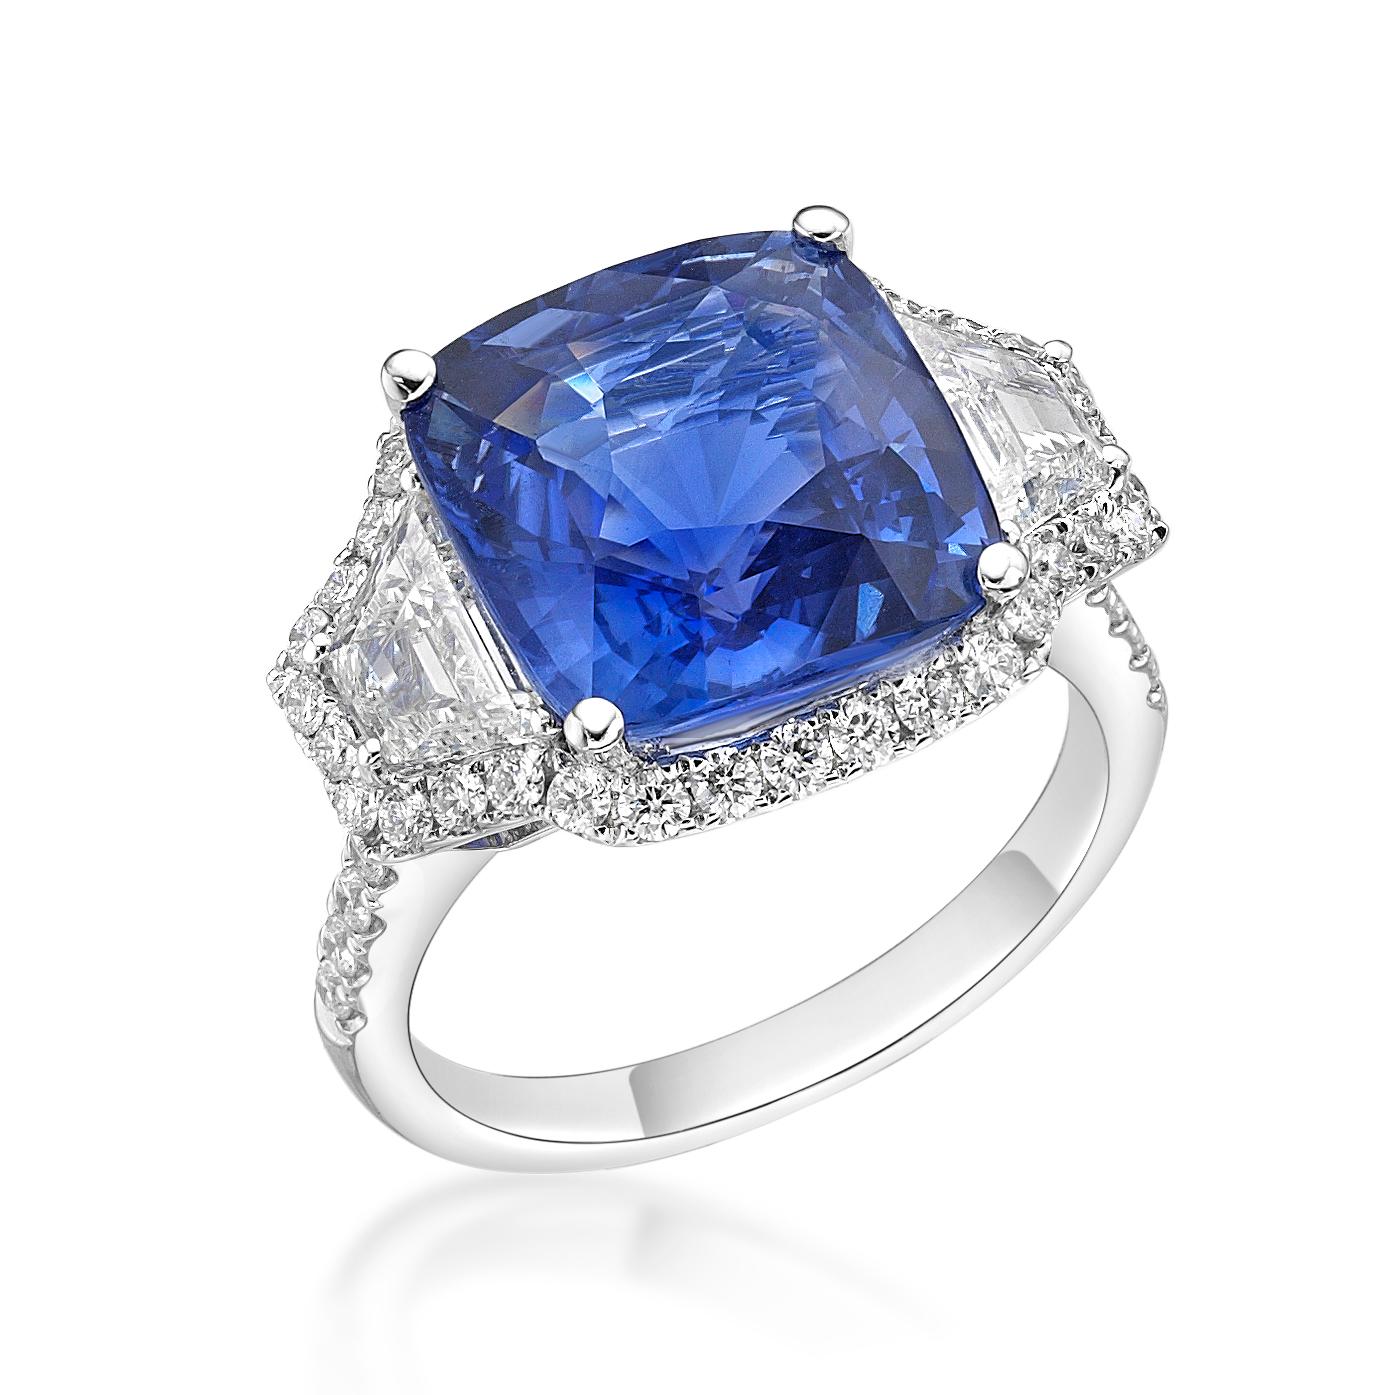 In the very center of this exquisite ring is a 9.16 ct unheated cushion blue sapphire originated from Sri Lanka. Flanking the gemstone are two trapeze diamonds surrounded by a halo of sparkling diamonds. This ring can be resized upon request.